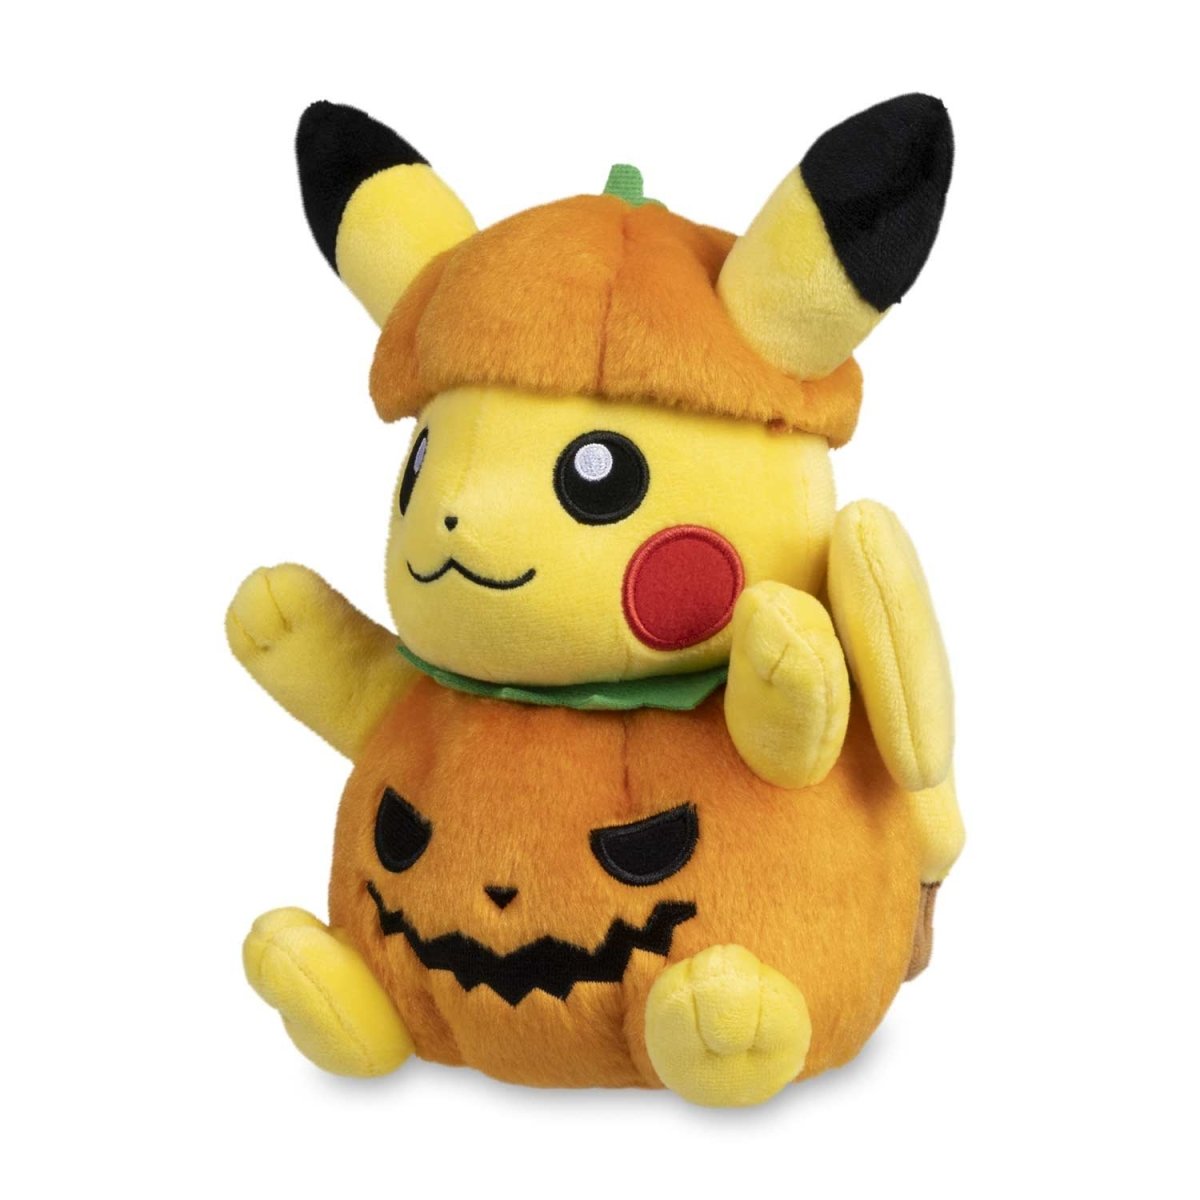 when your kids asks for a giant Pikachu costume for Halloween, just do